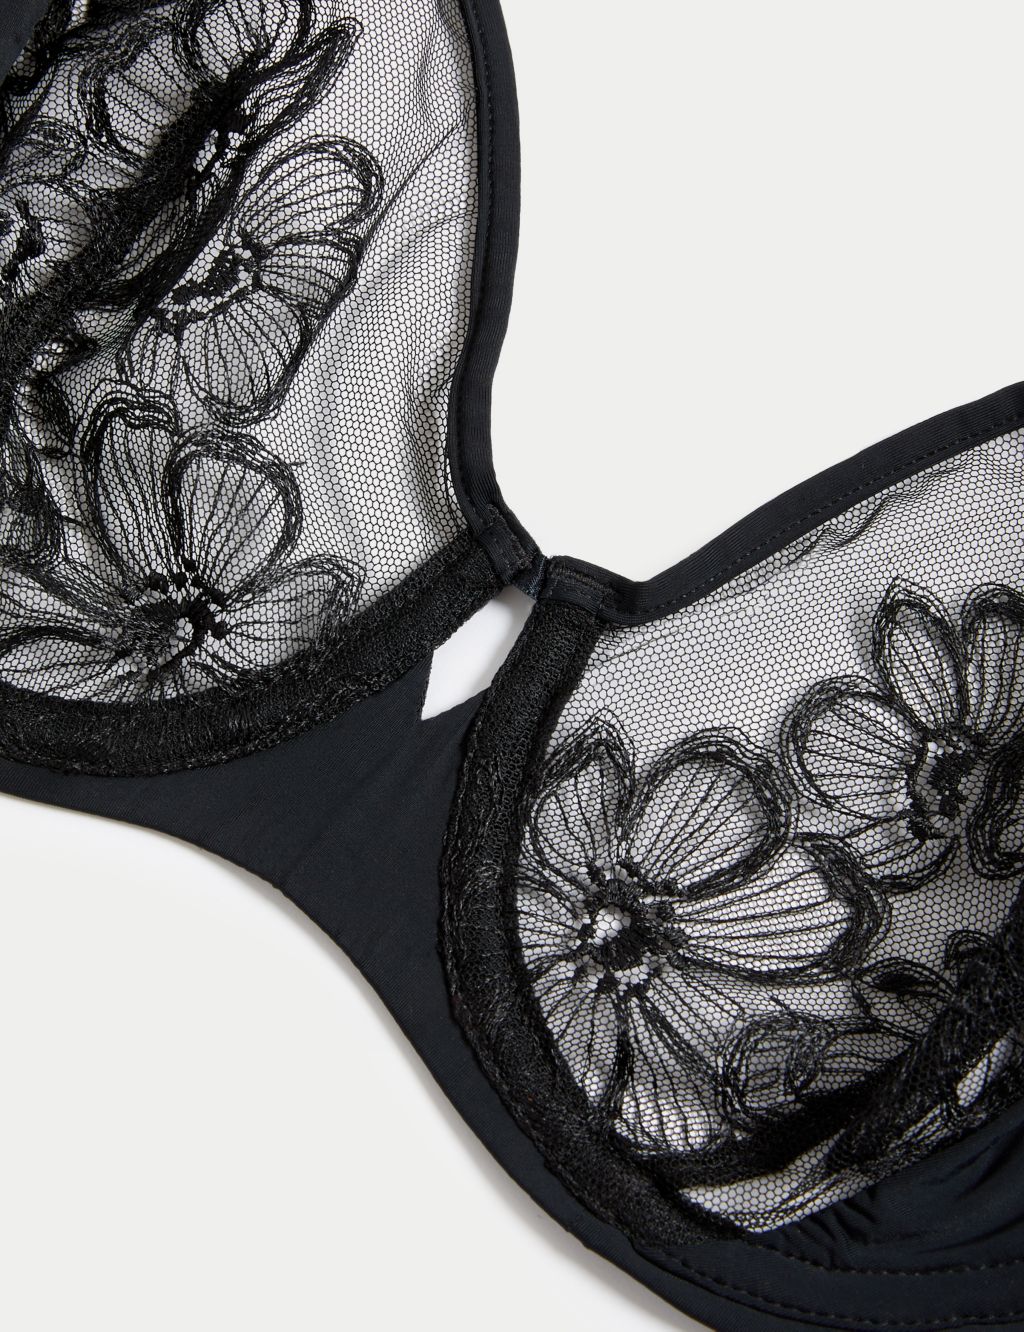 Embrace Embroidered Wired Full Cup Bra A-E, M&S Collection